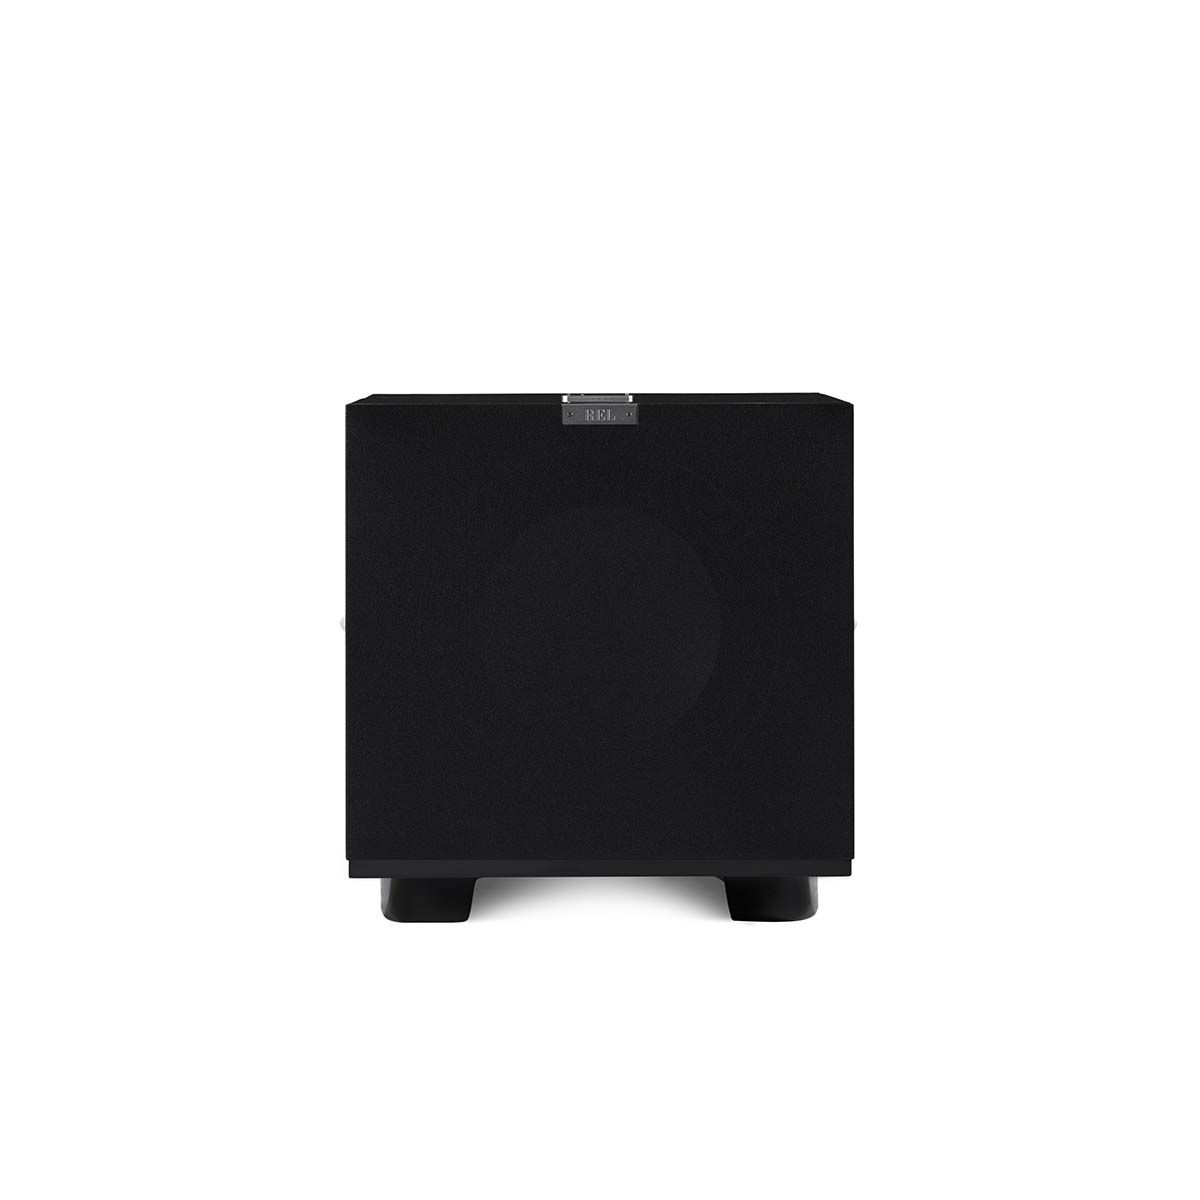 REL Acoustics S/812 Subwoofer, Black, front view with grille